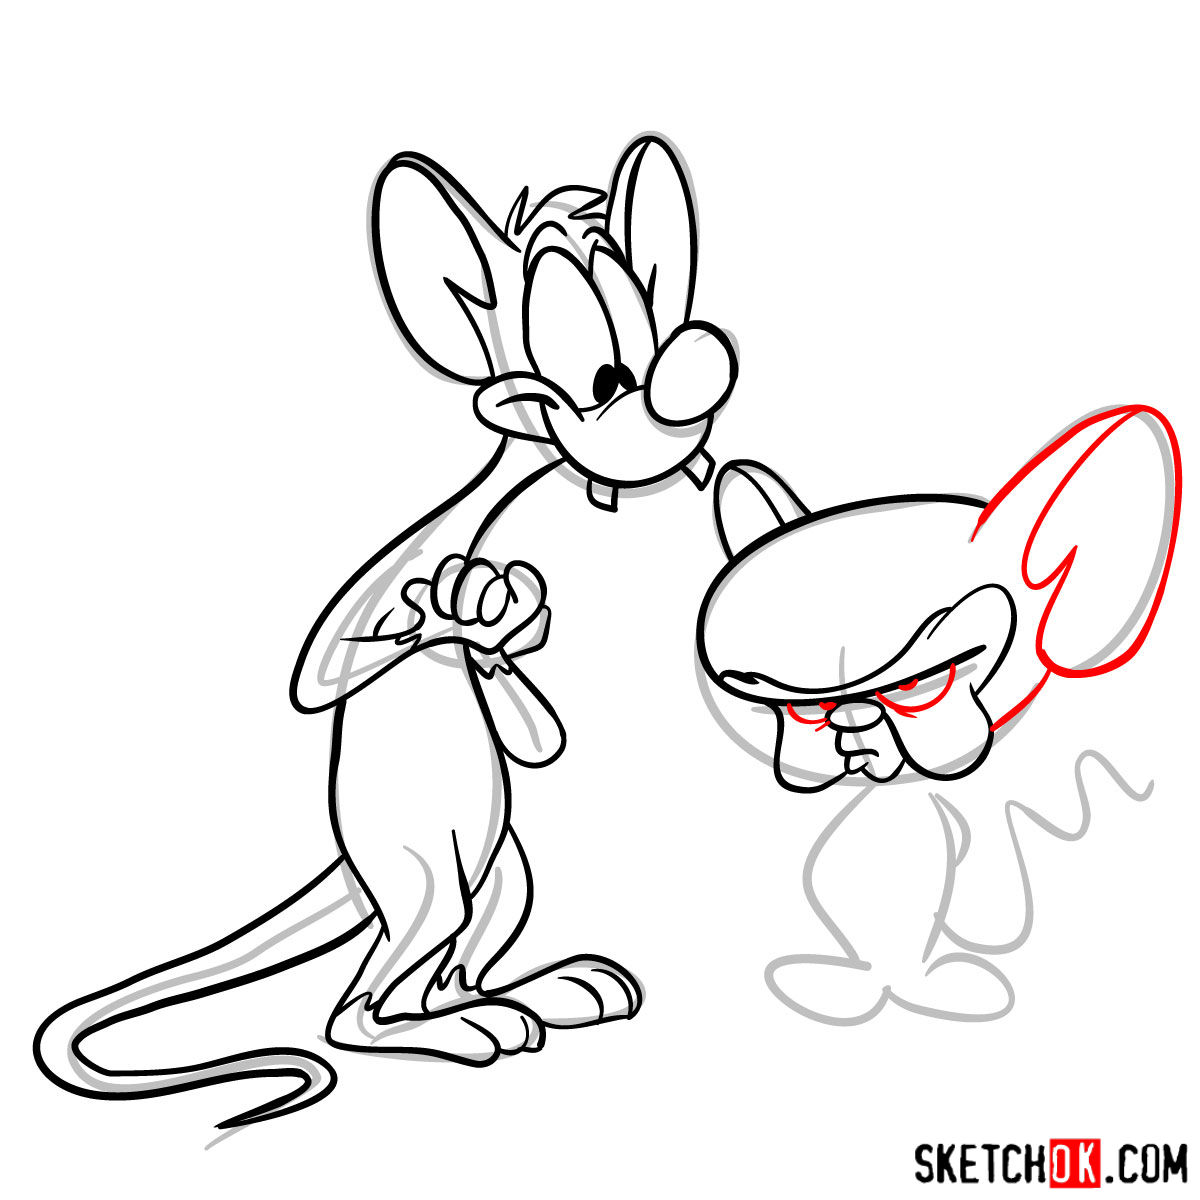 How to draw Pinky and the Brain together - step 11